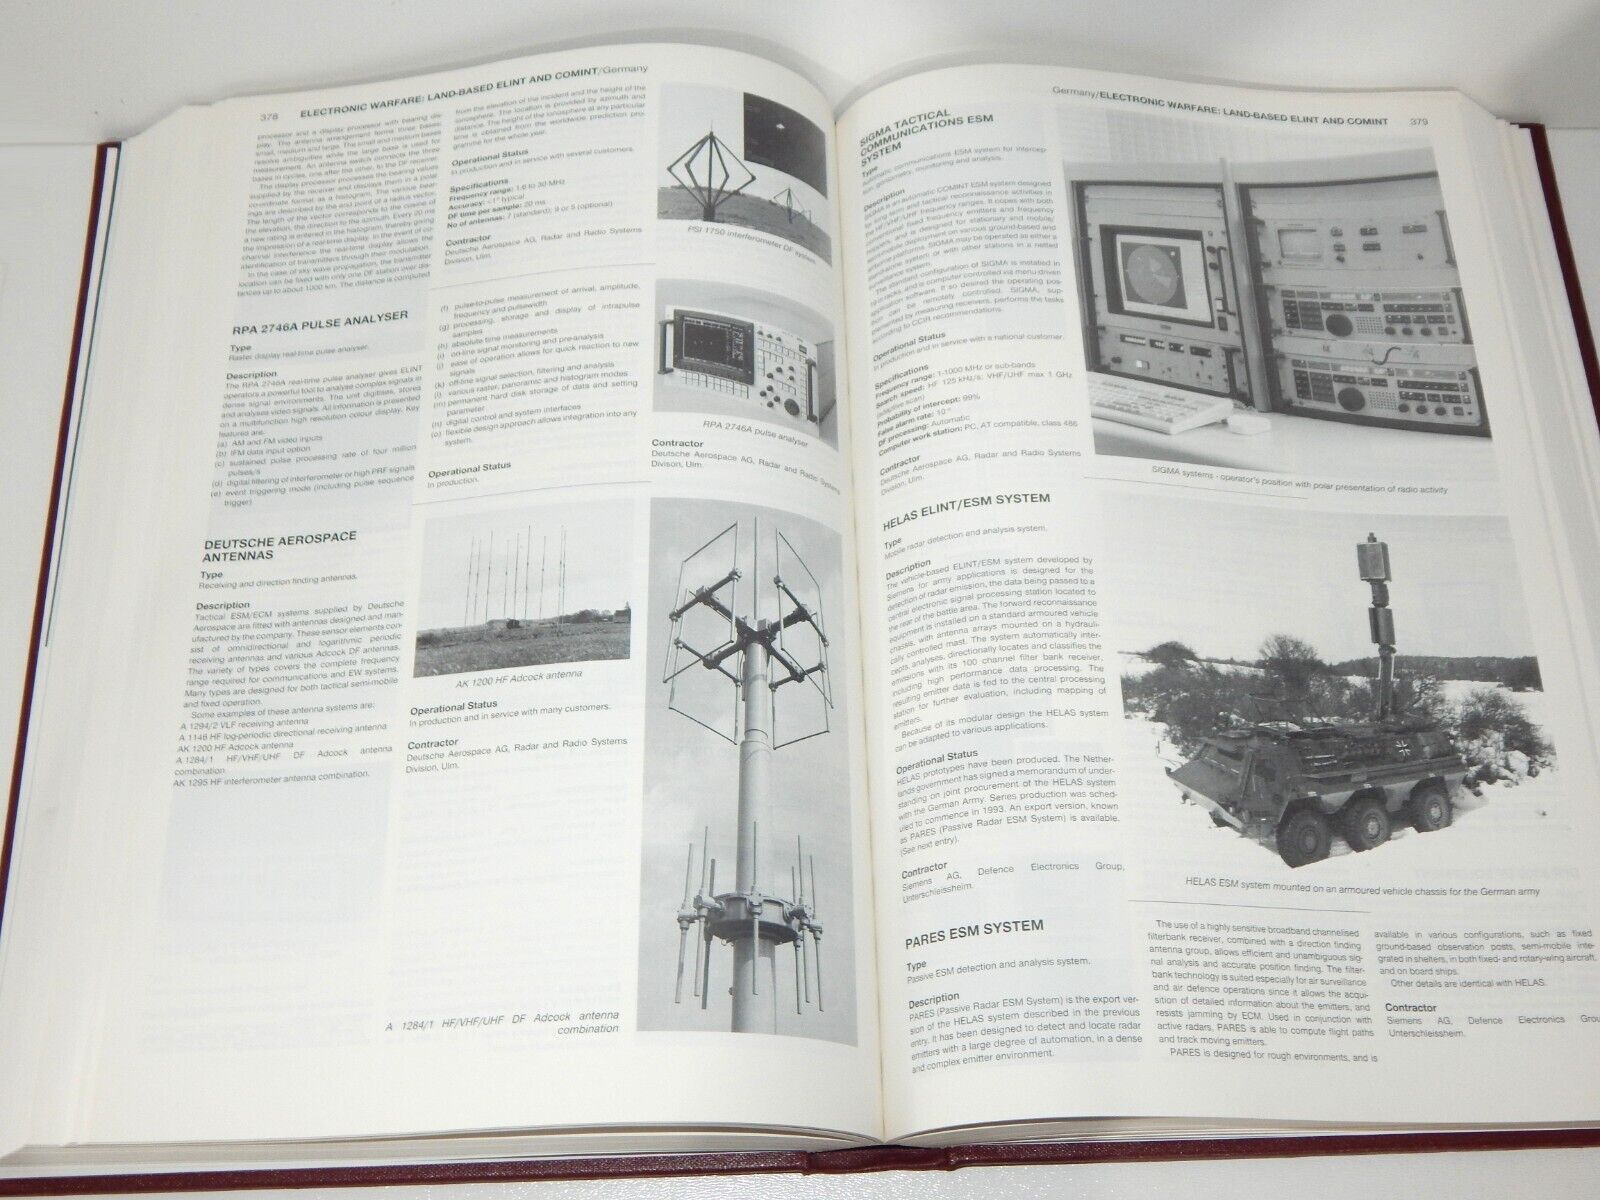 used Jane's Radar and Electronic Warfare Systems 1994-95 Military Book Military Book